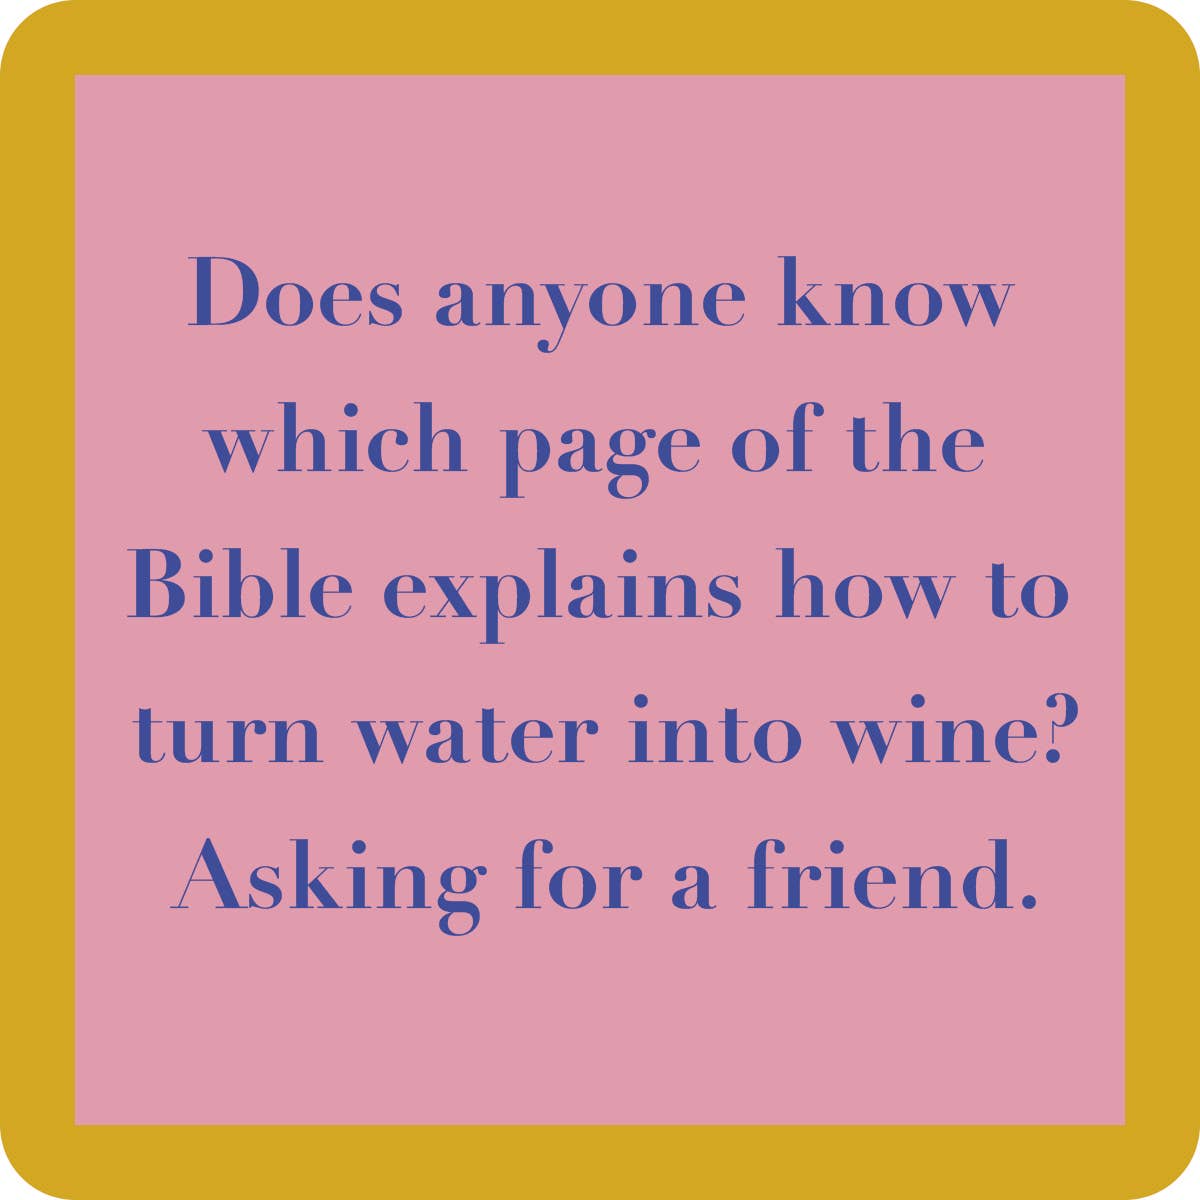 Drinks on Me - COASTER: Page in the bible